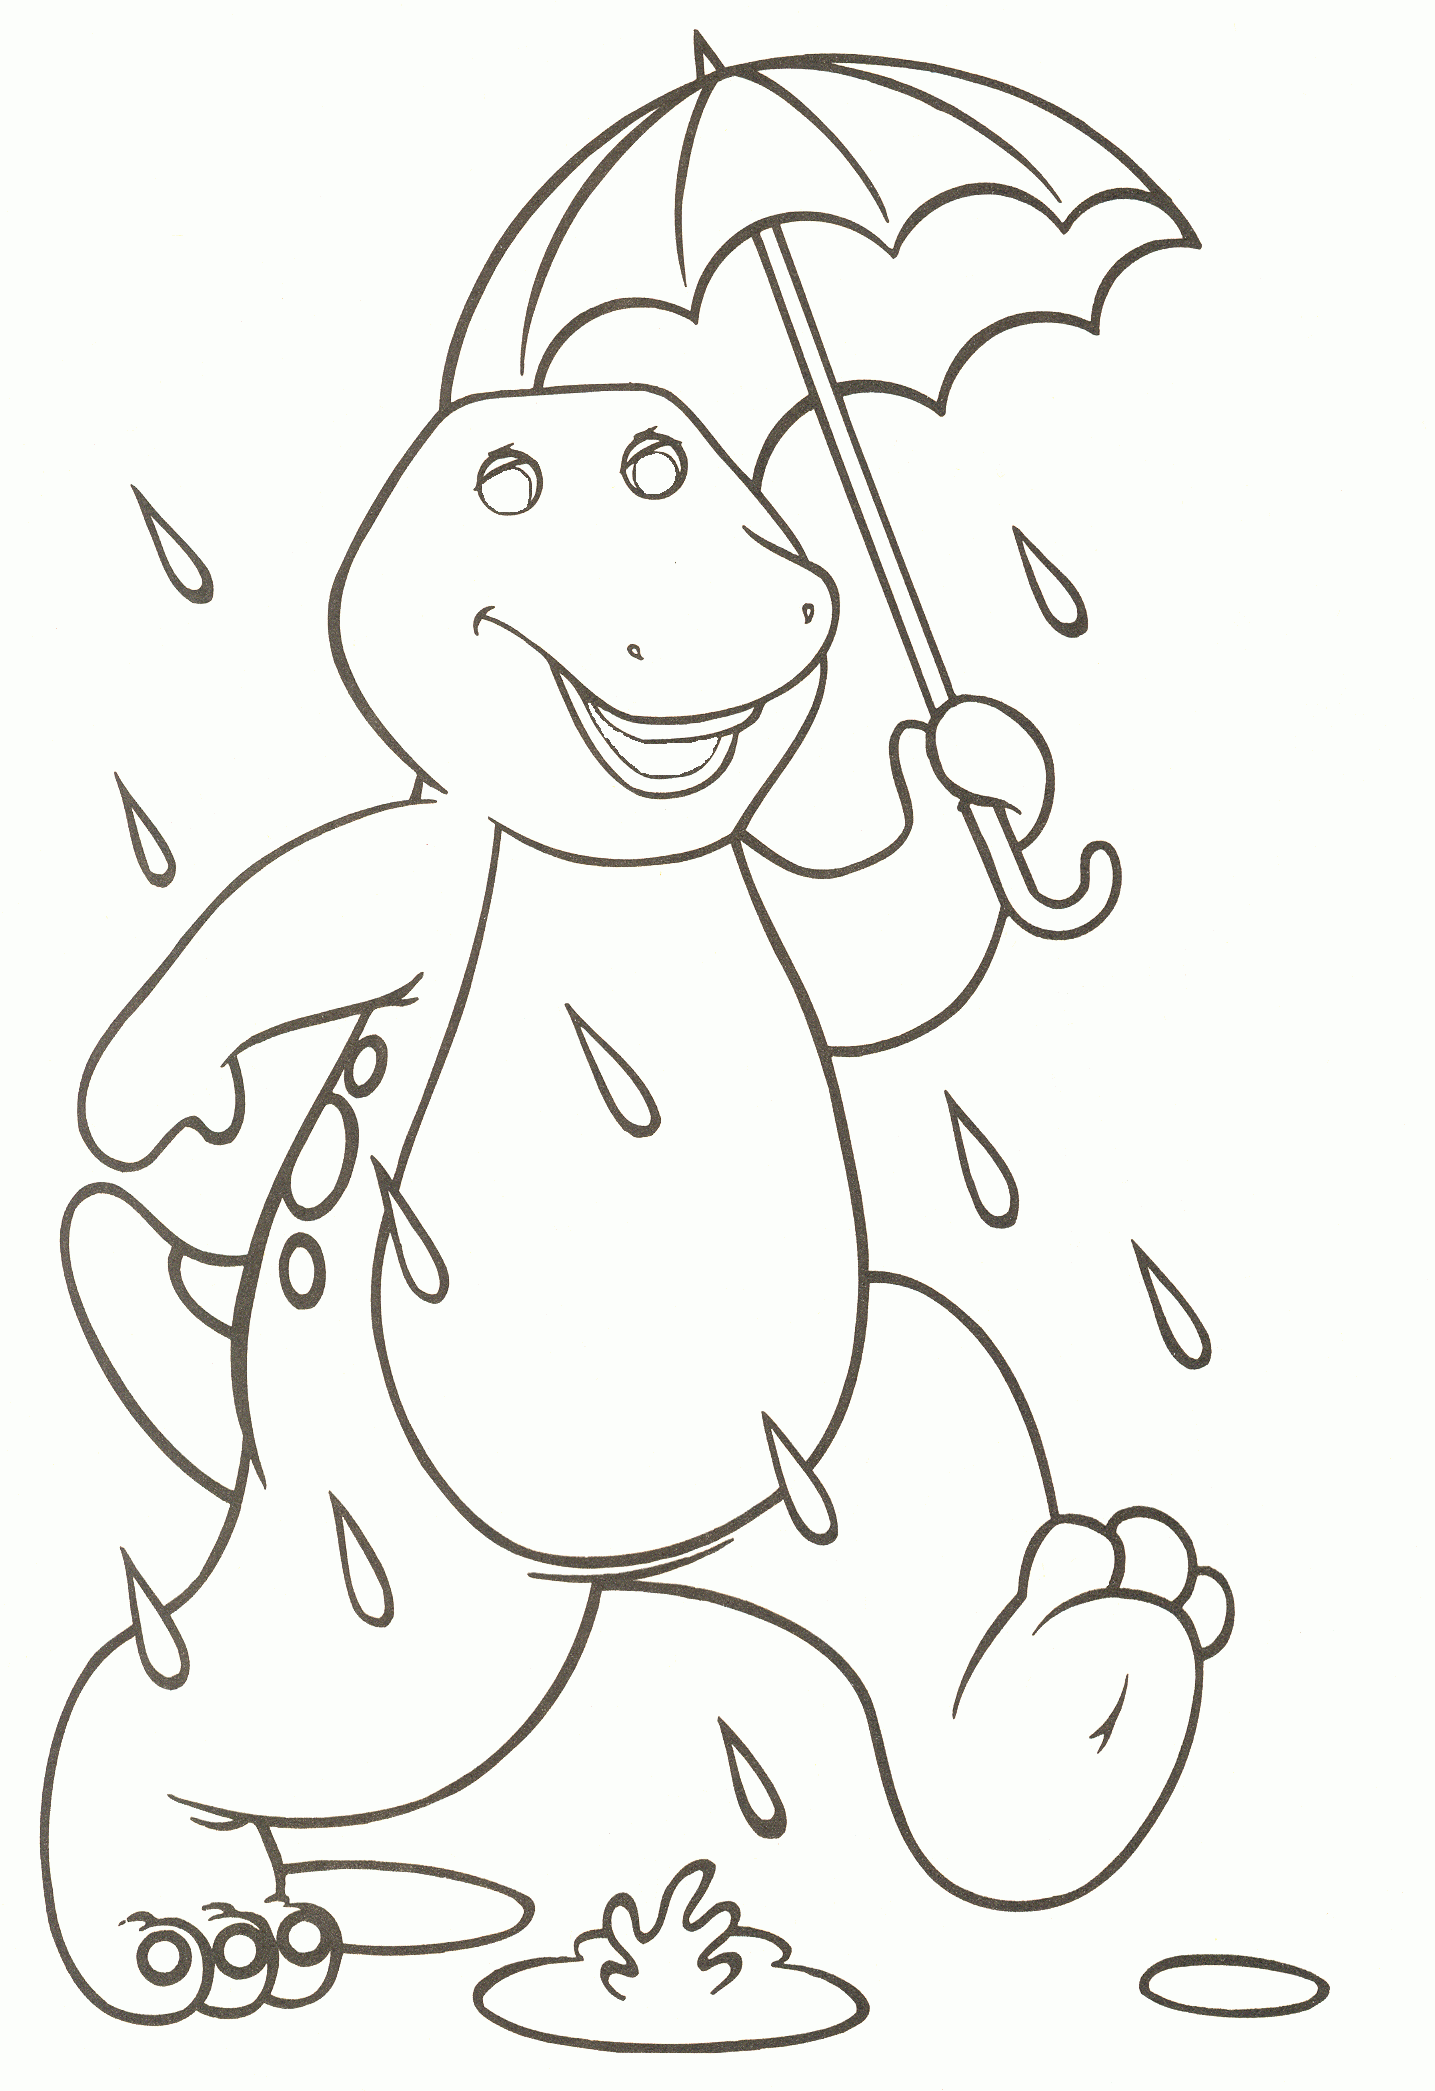 Barney and Friends Coloring Pages TV Film Printable Barney For Kids Printable 2020 00695 Coloring4free